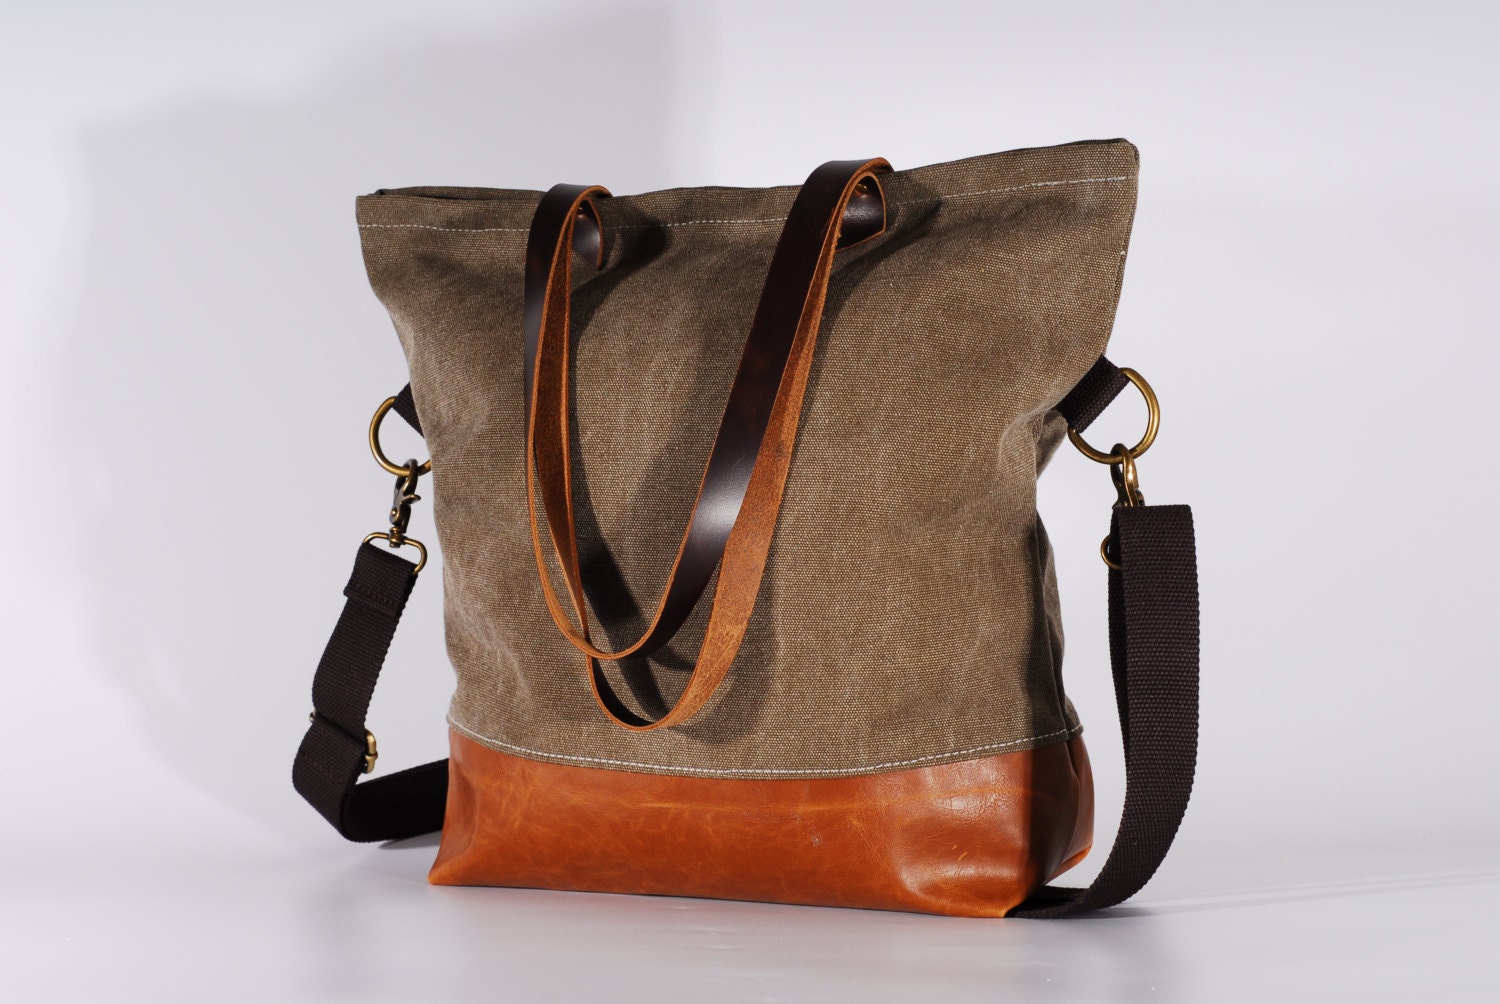 Folding bag – Convertible Tote, Canvas Base Cotton Adjustable Strap – Leather Handles/Canvas and ...